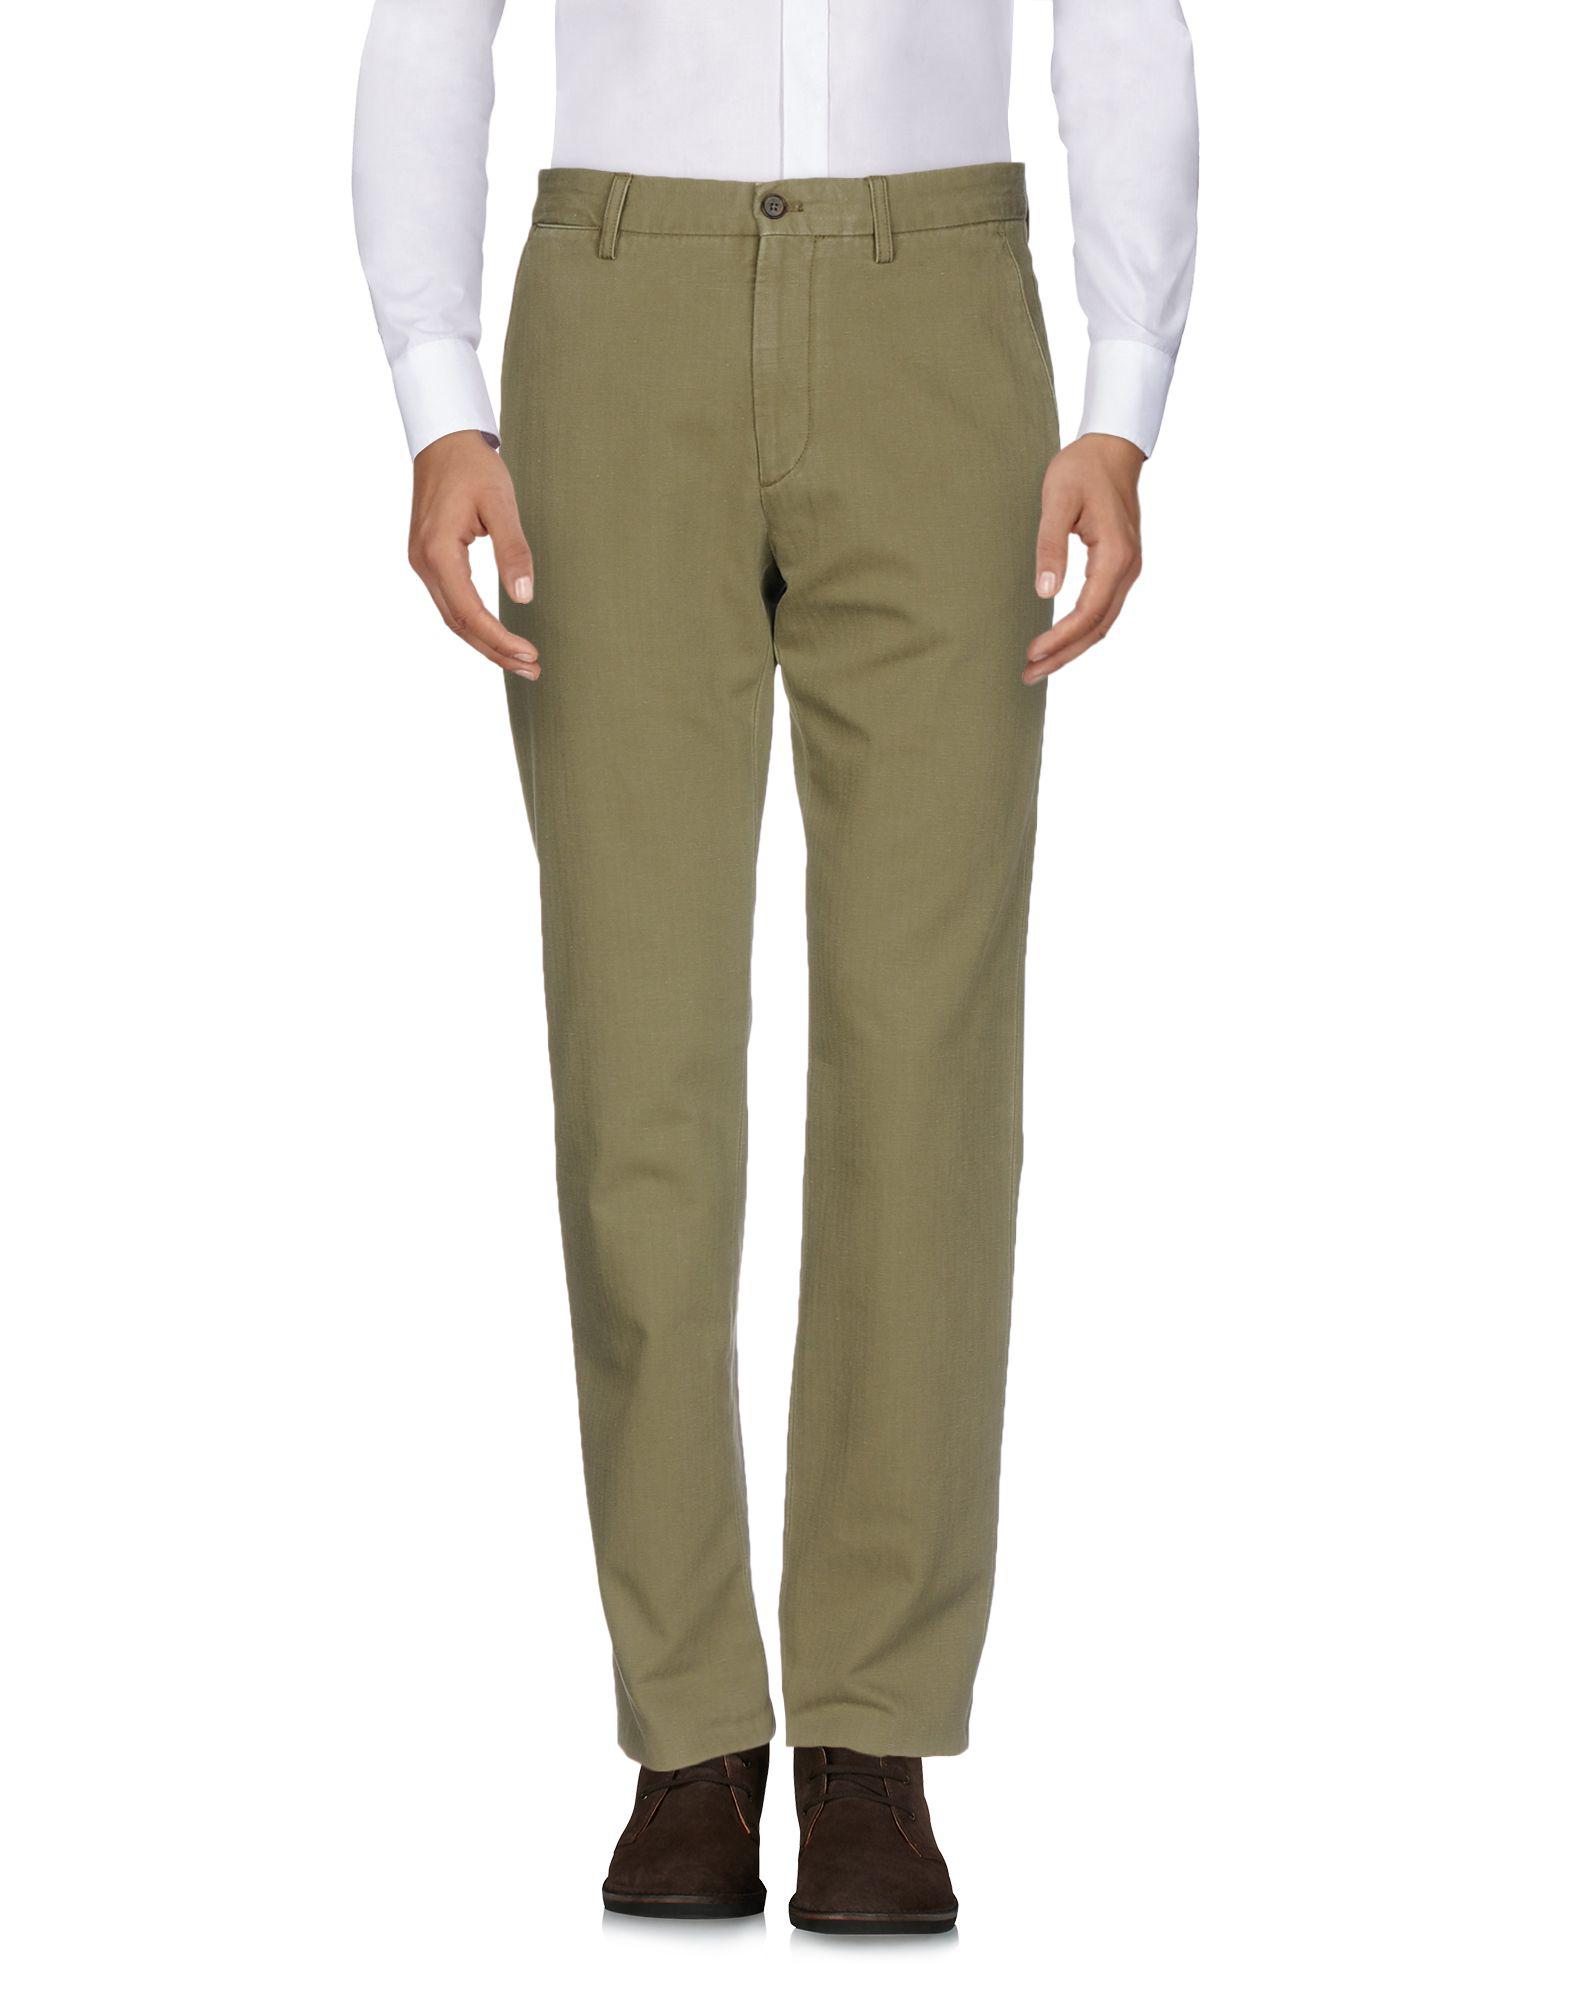 Maison Margiela Cotton Casual Trouser in Military Green (Green) for Men